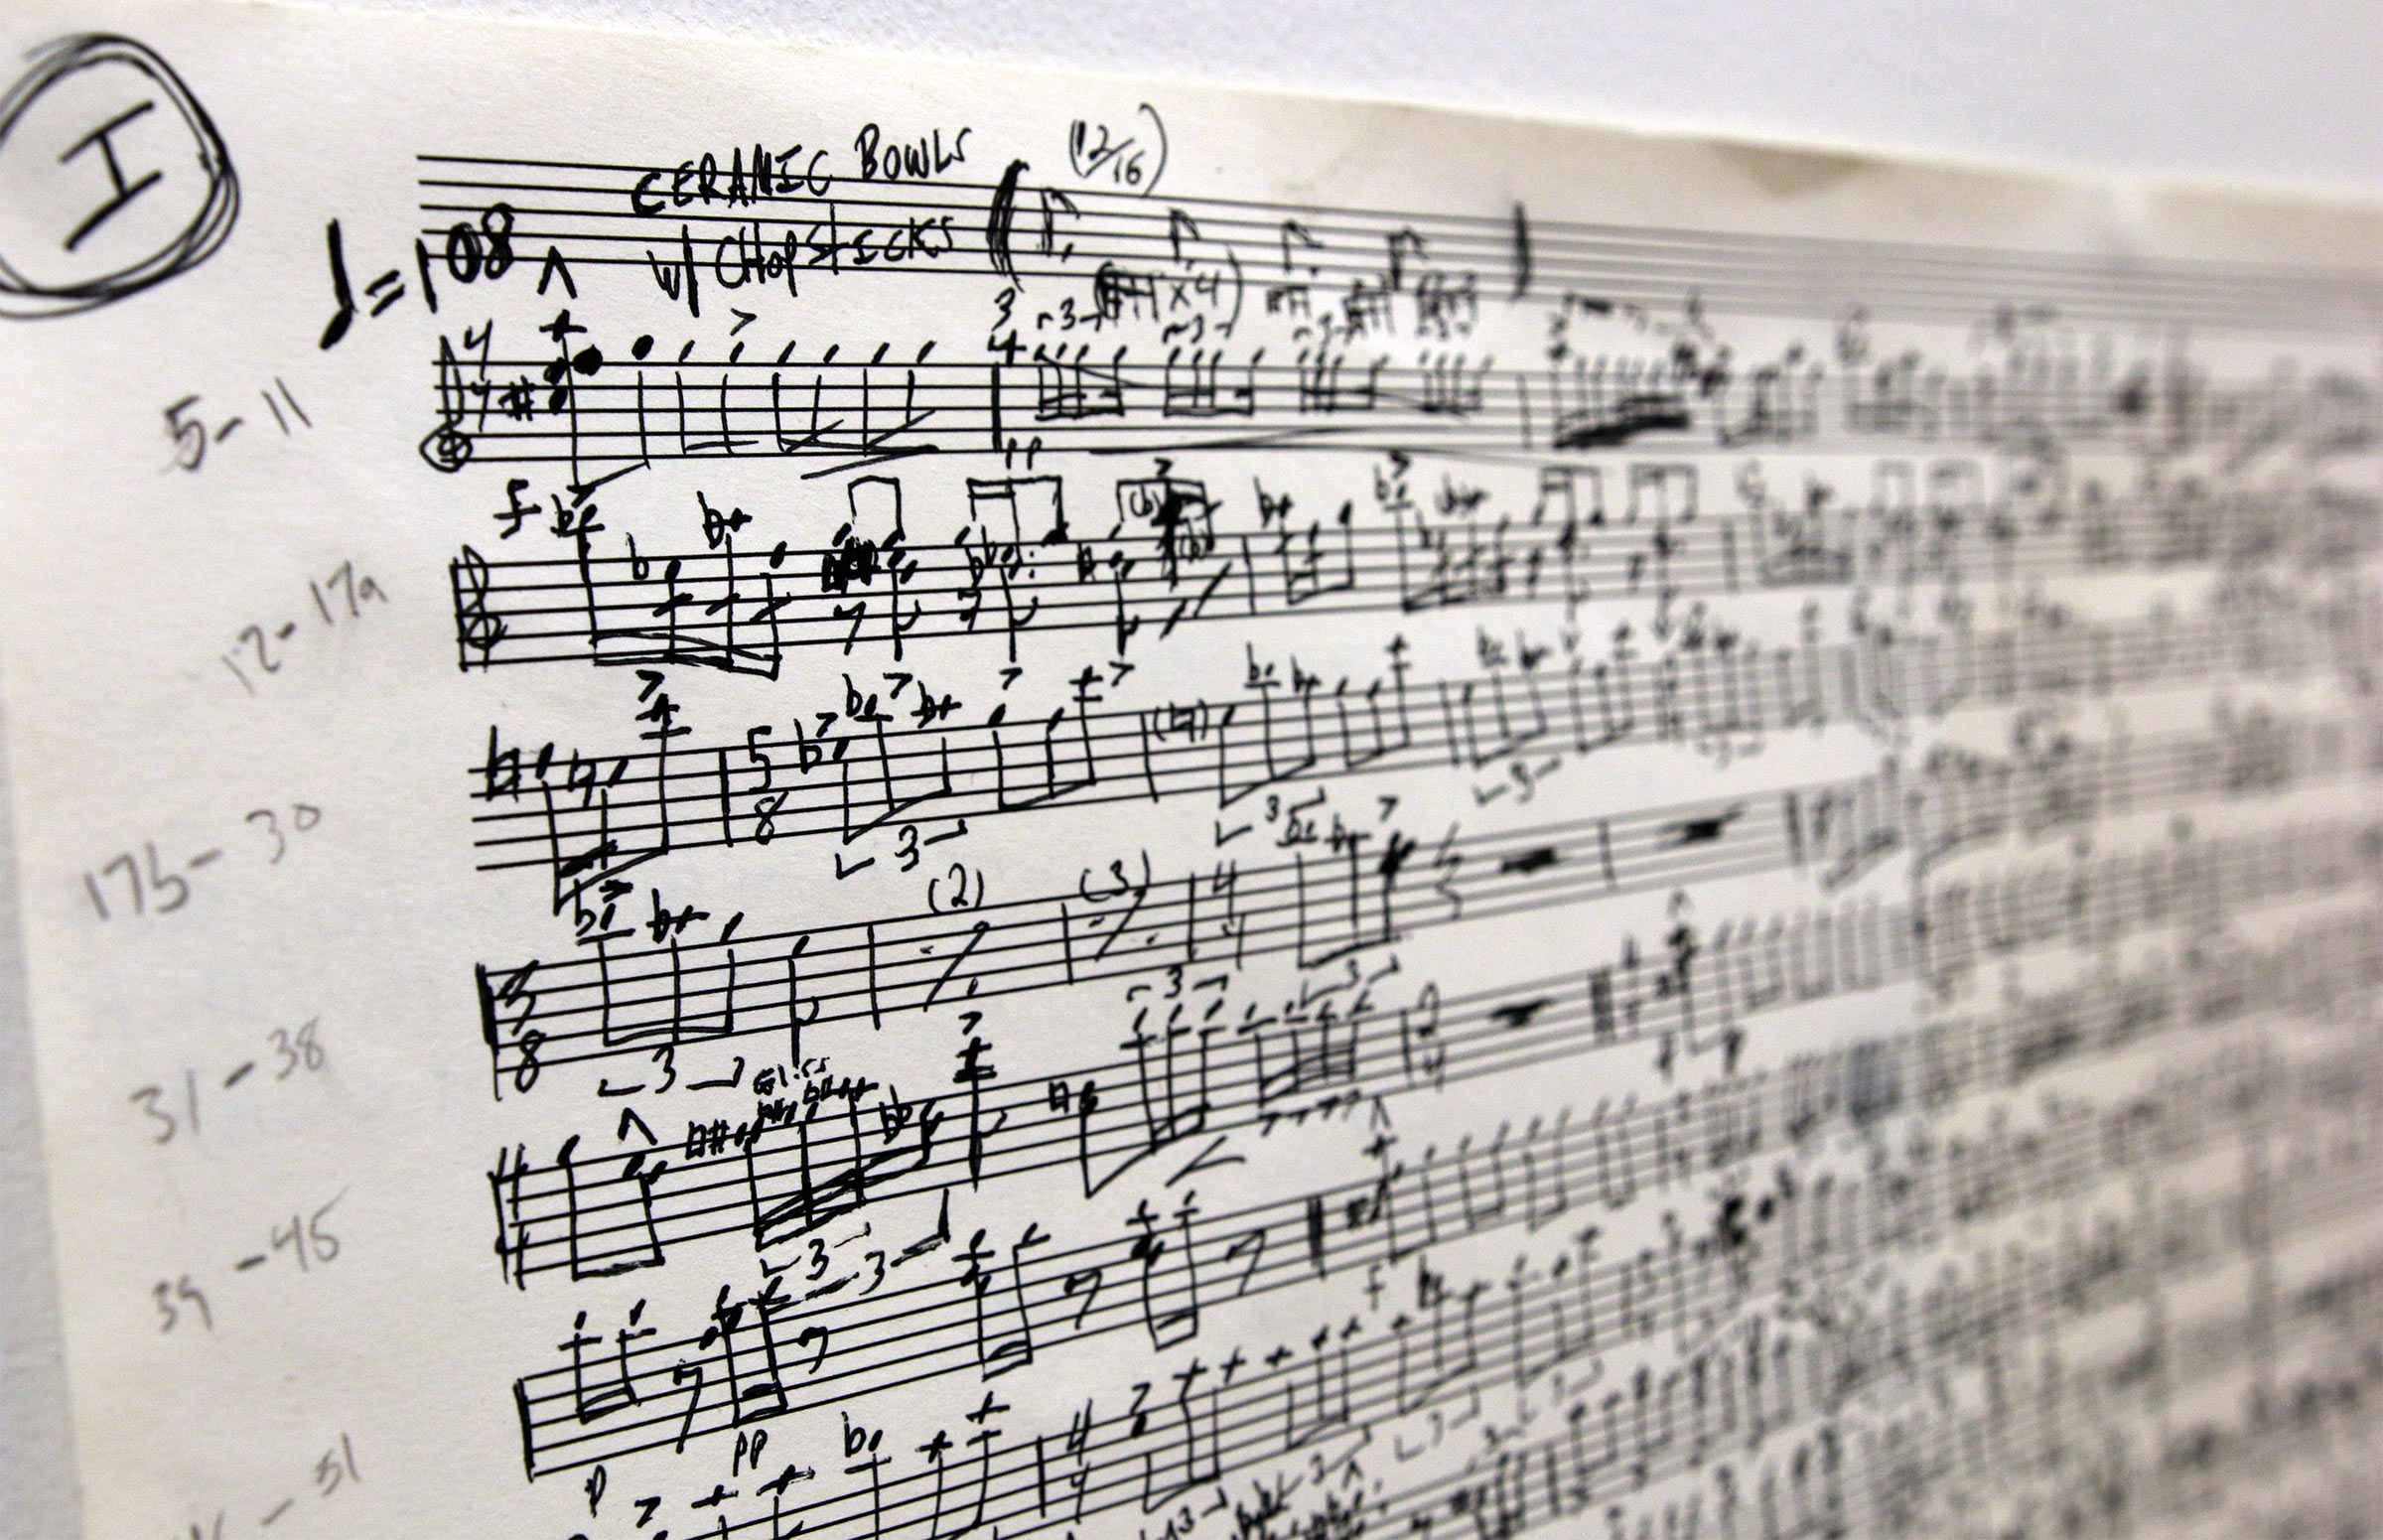 A page from a handwritten score by Andy Akiho.